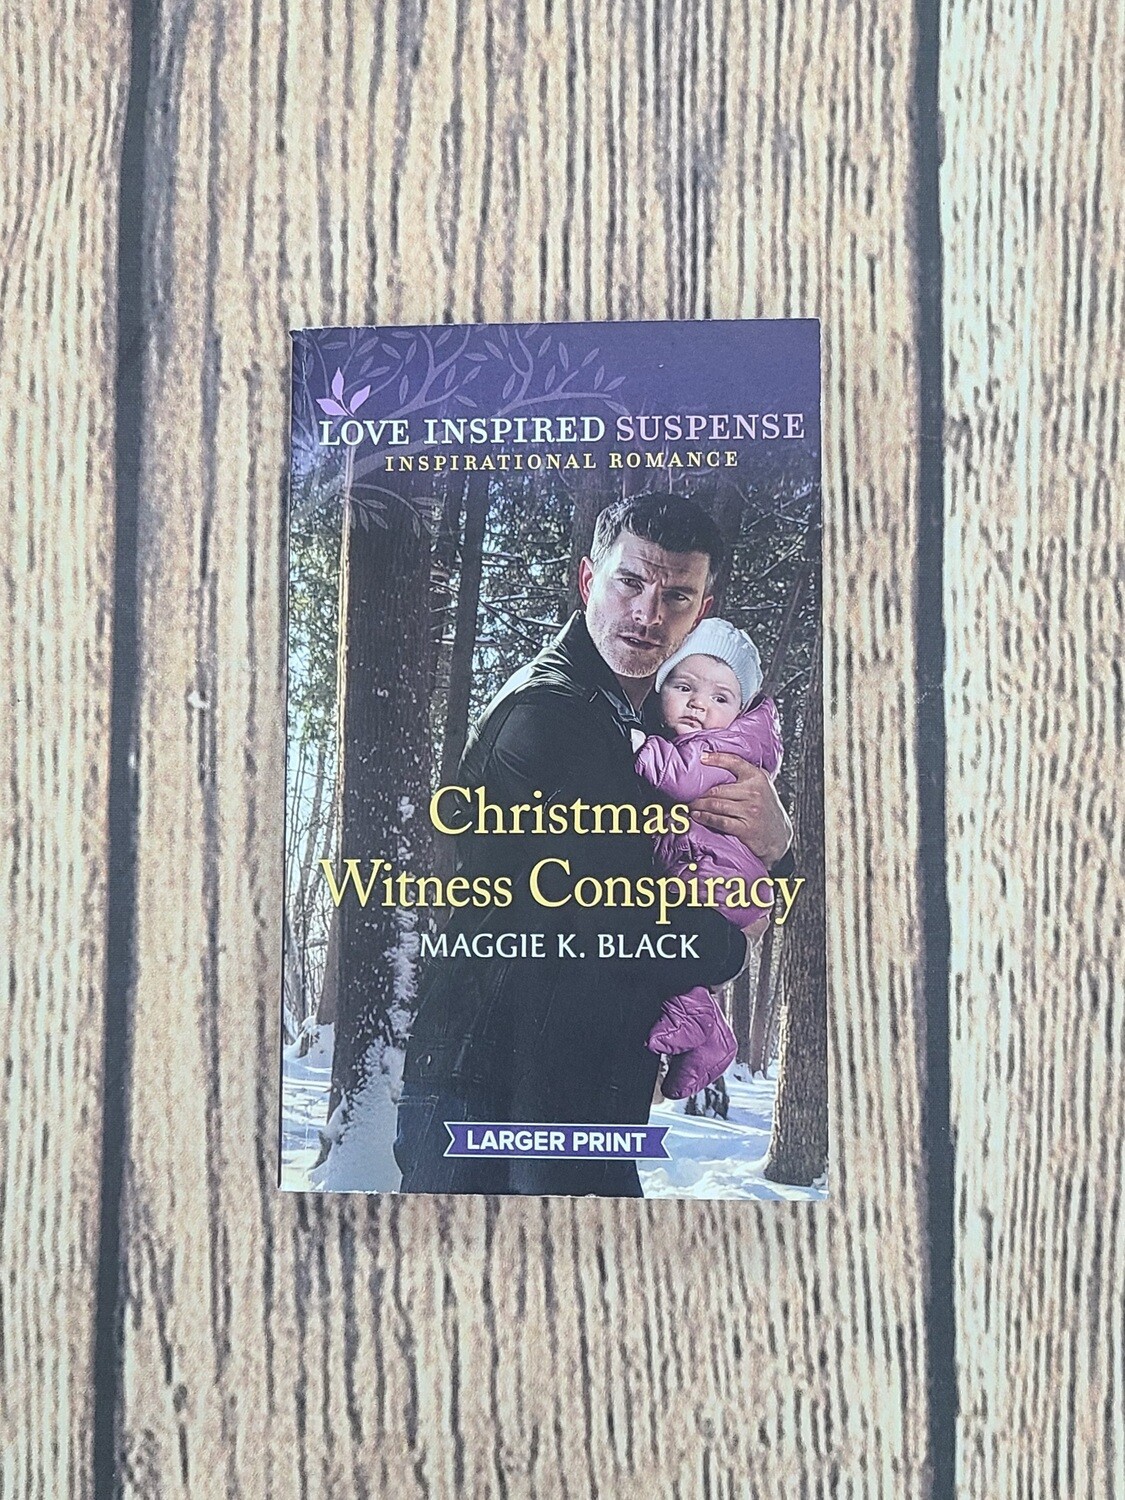 Christmas Witness Conspiracy by Maggie K. Black - Great Condition